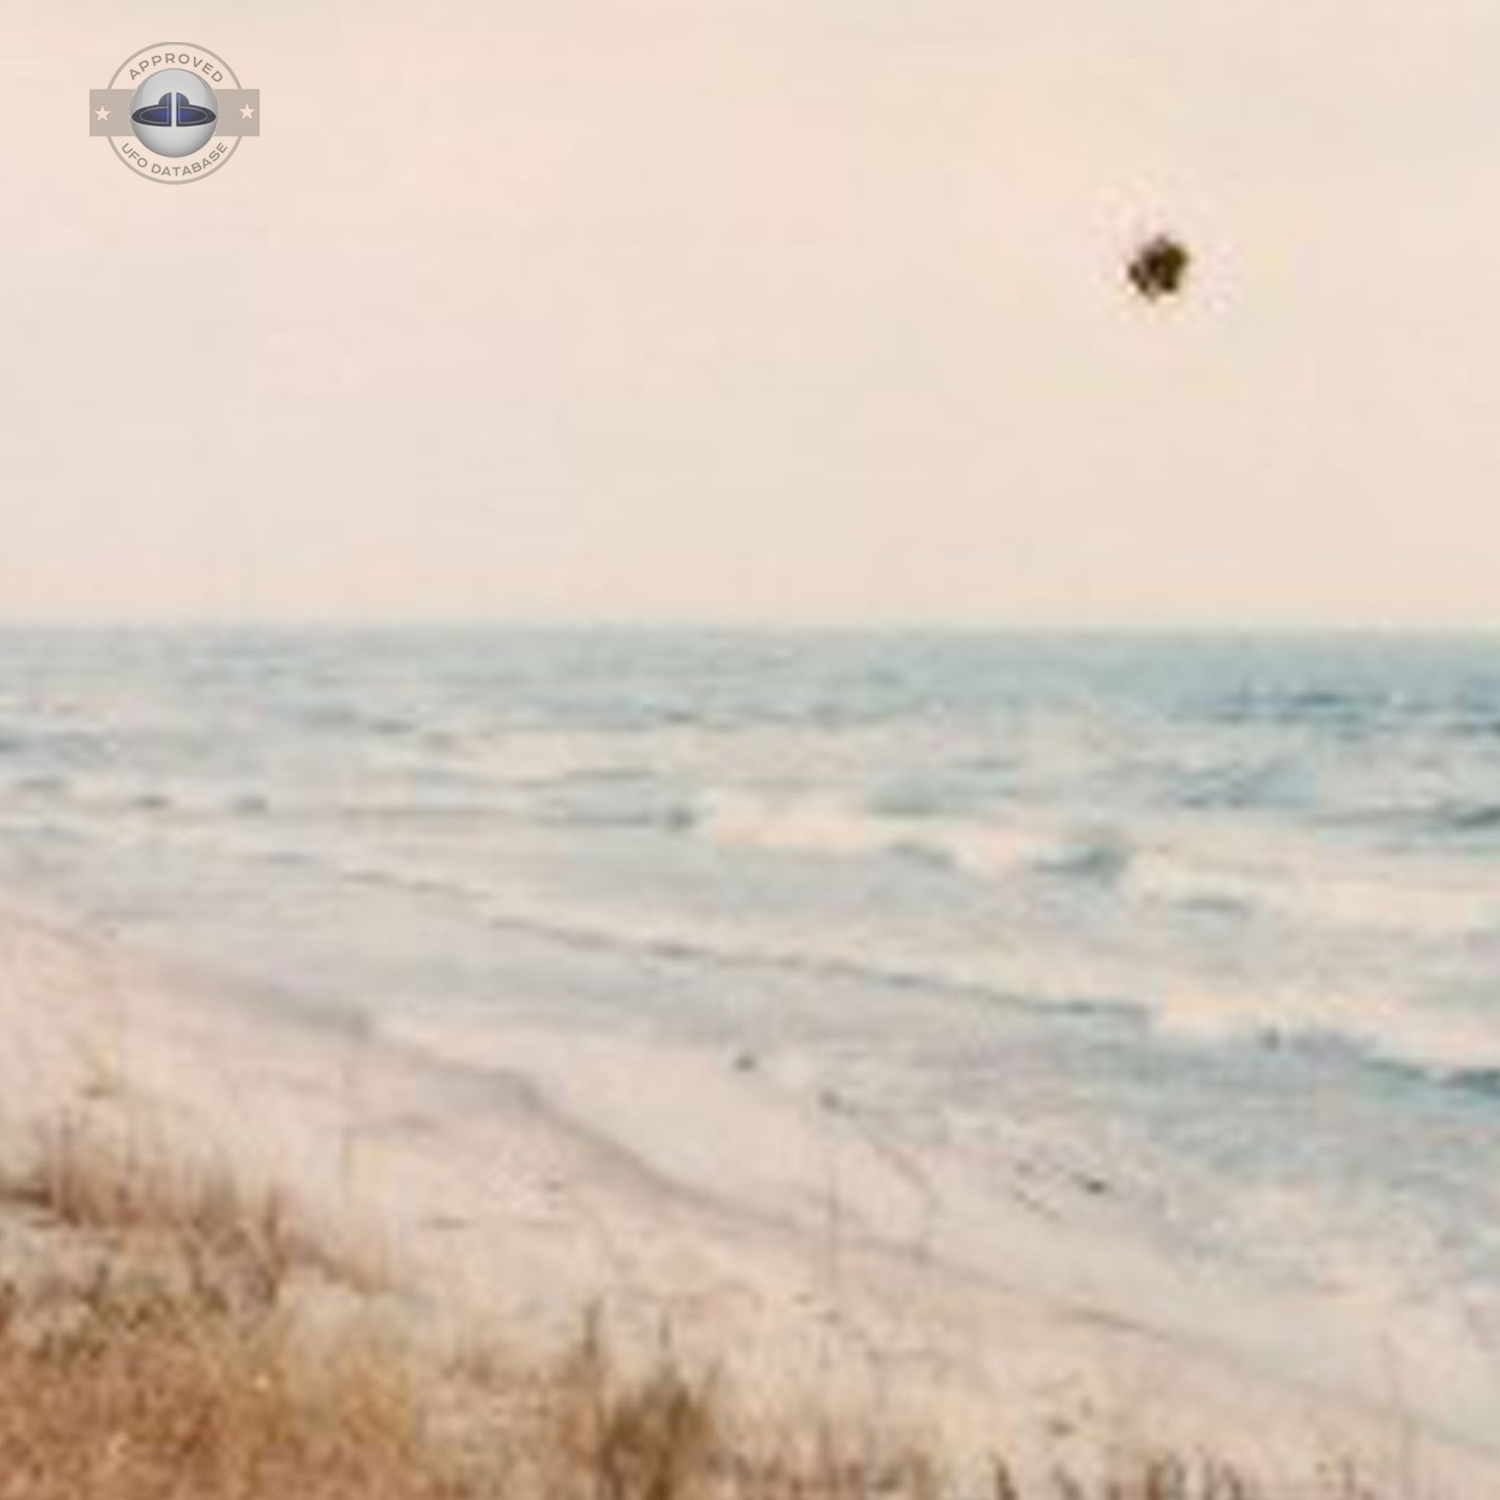 UFO Picture - UFO Sighting over Great Lake Michigan - October 1979 UFO Picture #91-2